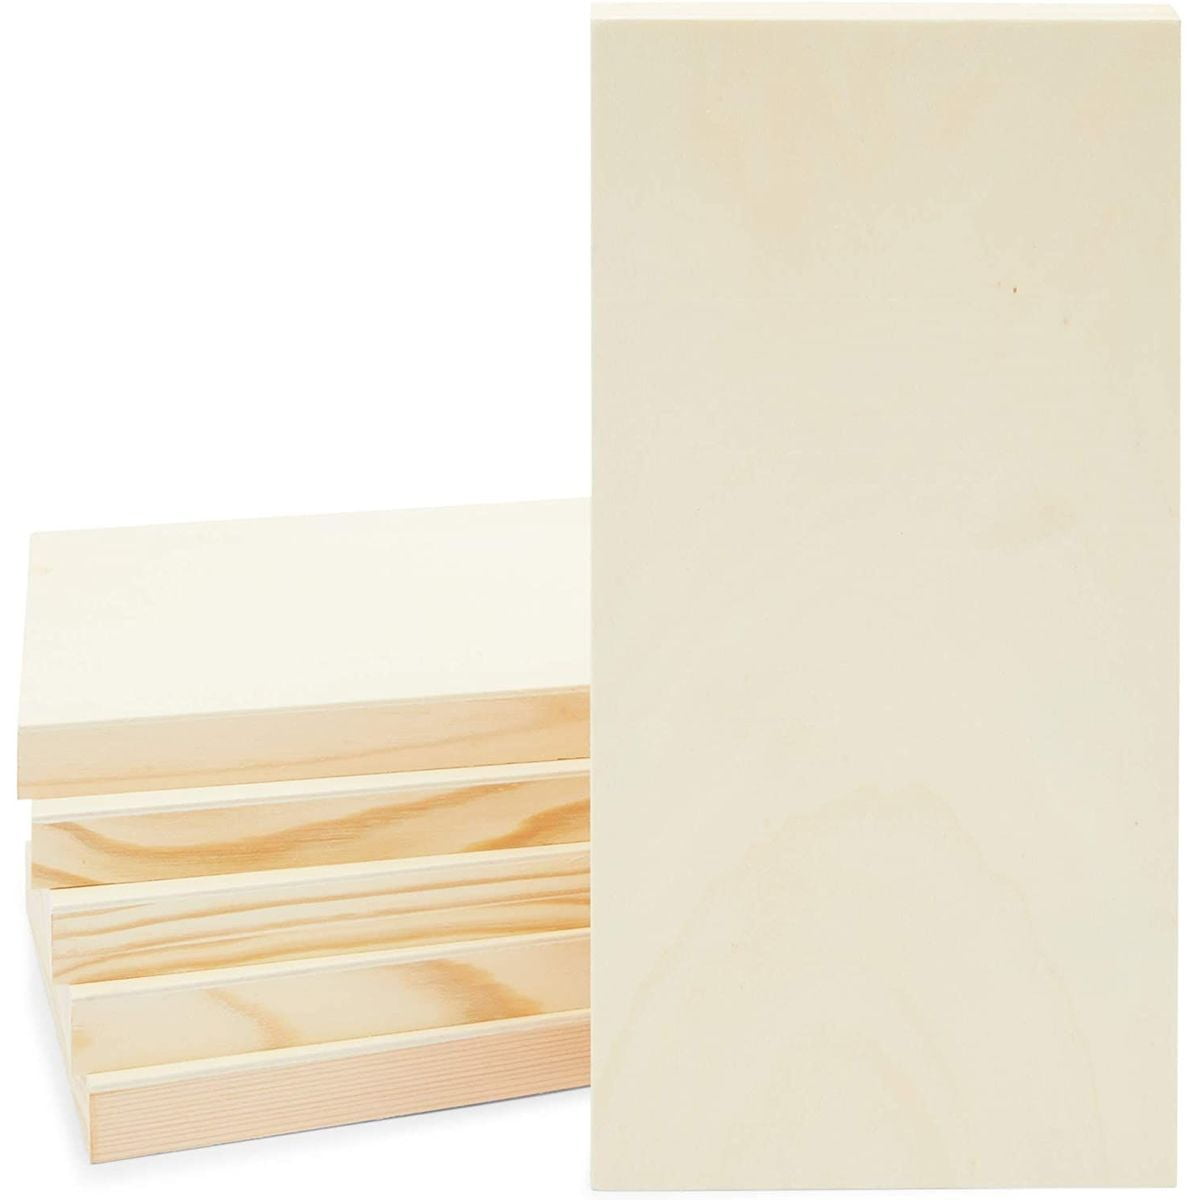  PHOENIX Gesso Boards for Painting - 11x14 Inch / 4 Pack -  Coarse Surface 3/4 Inch Cradled Wood Panels for Oil & Acrylic Paints,  Crafts & Pouring Art